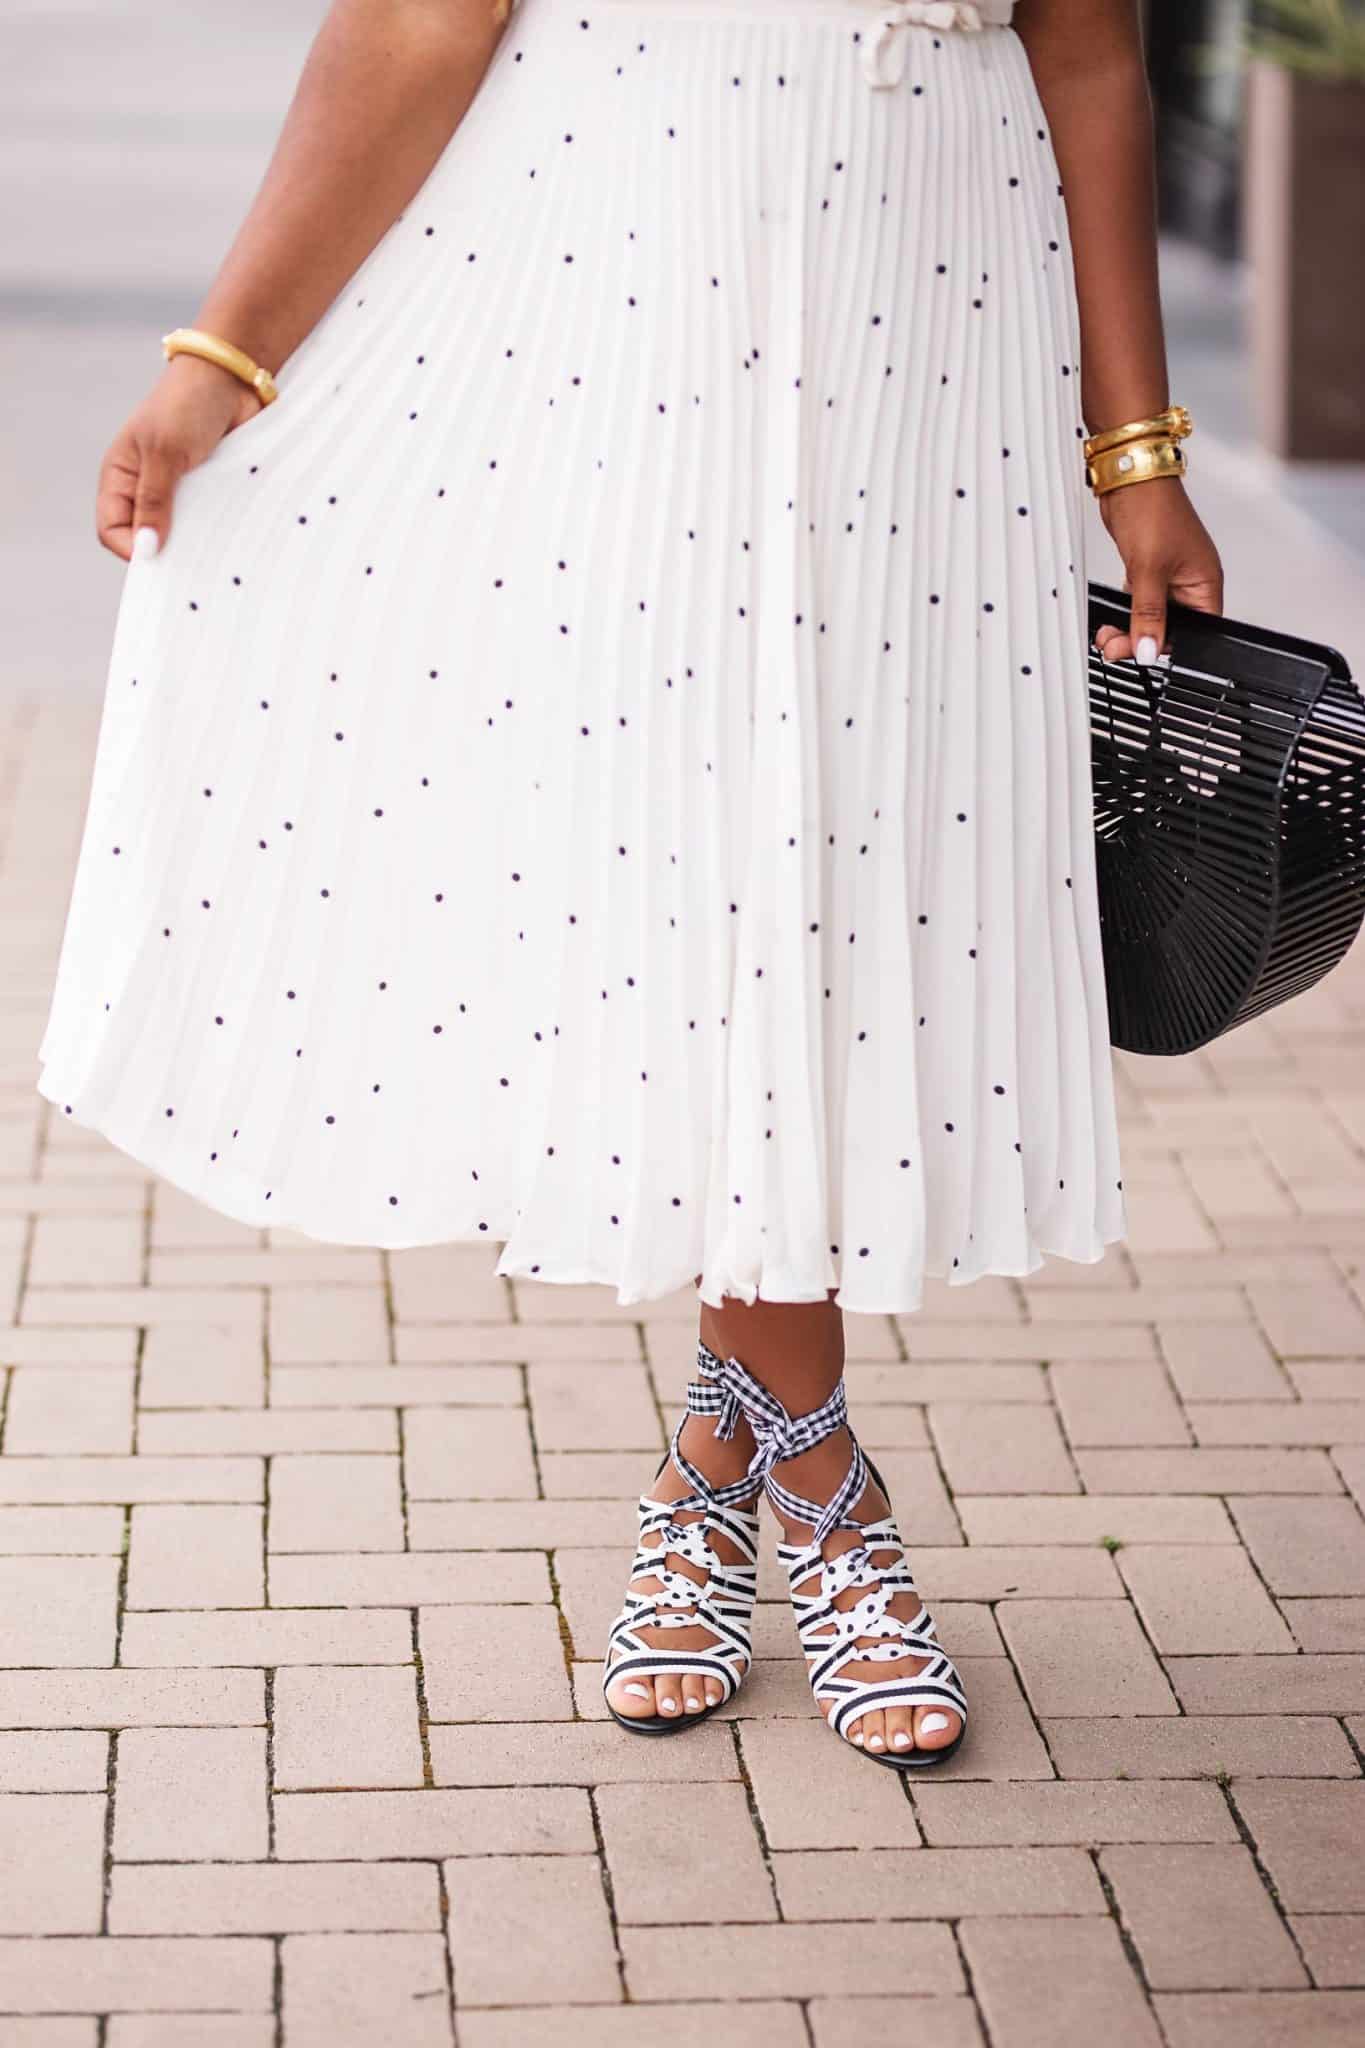 Top 10 dress styles to own featured by top US fashion blog, Glamorous Versatility